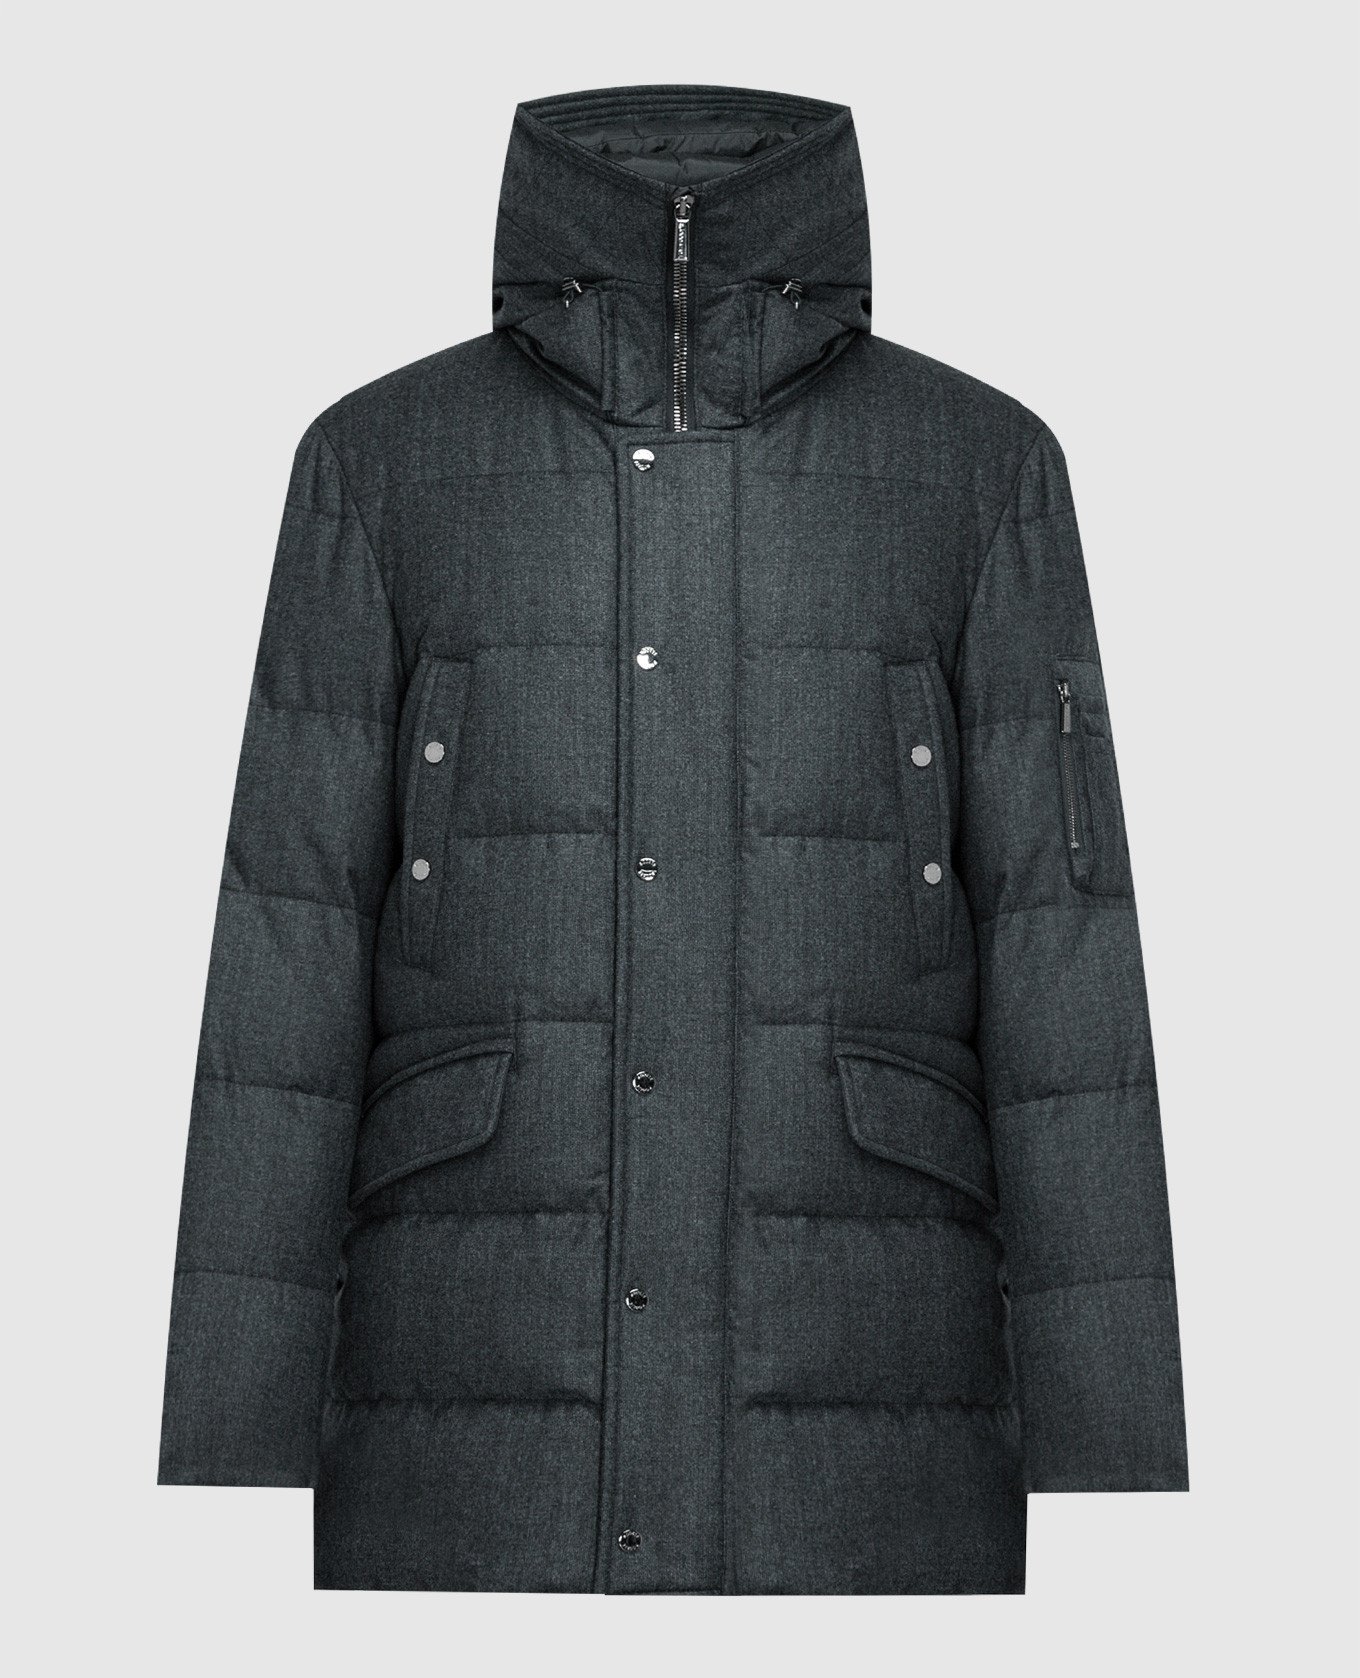 Grima FFL gray down jacket made of wool